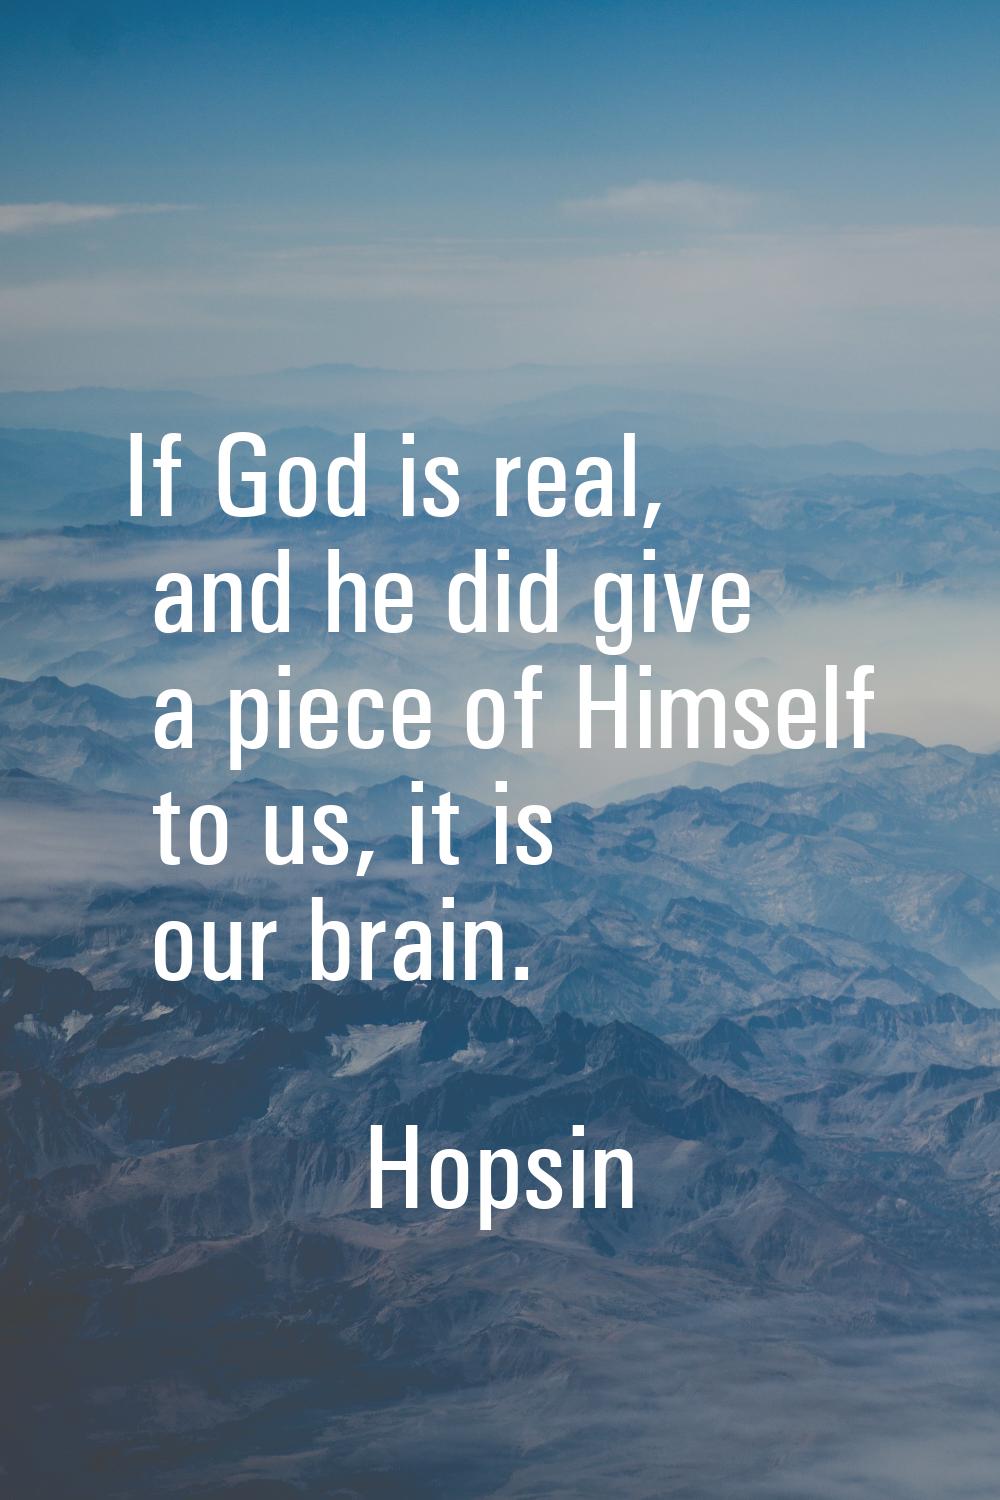 If God is real, and he did give a piece of Himself to us, it is our brain.